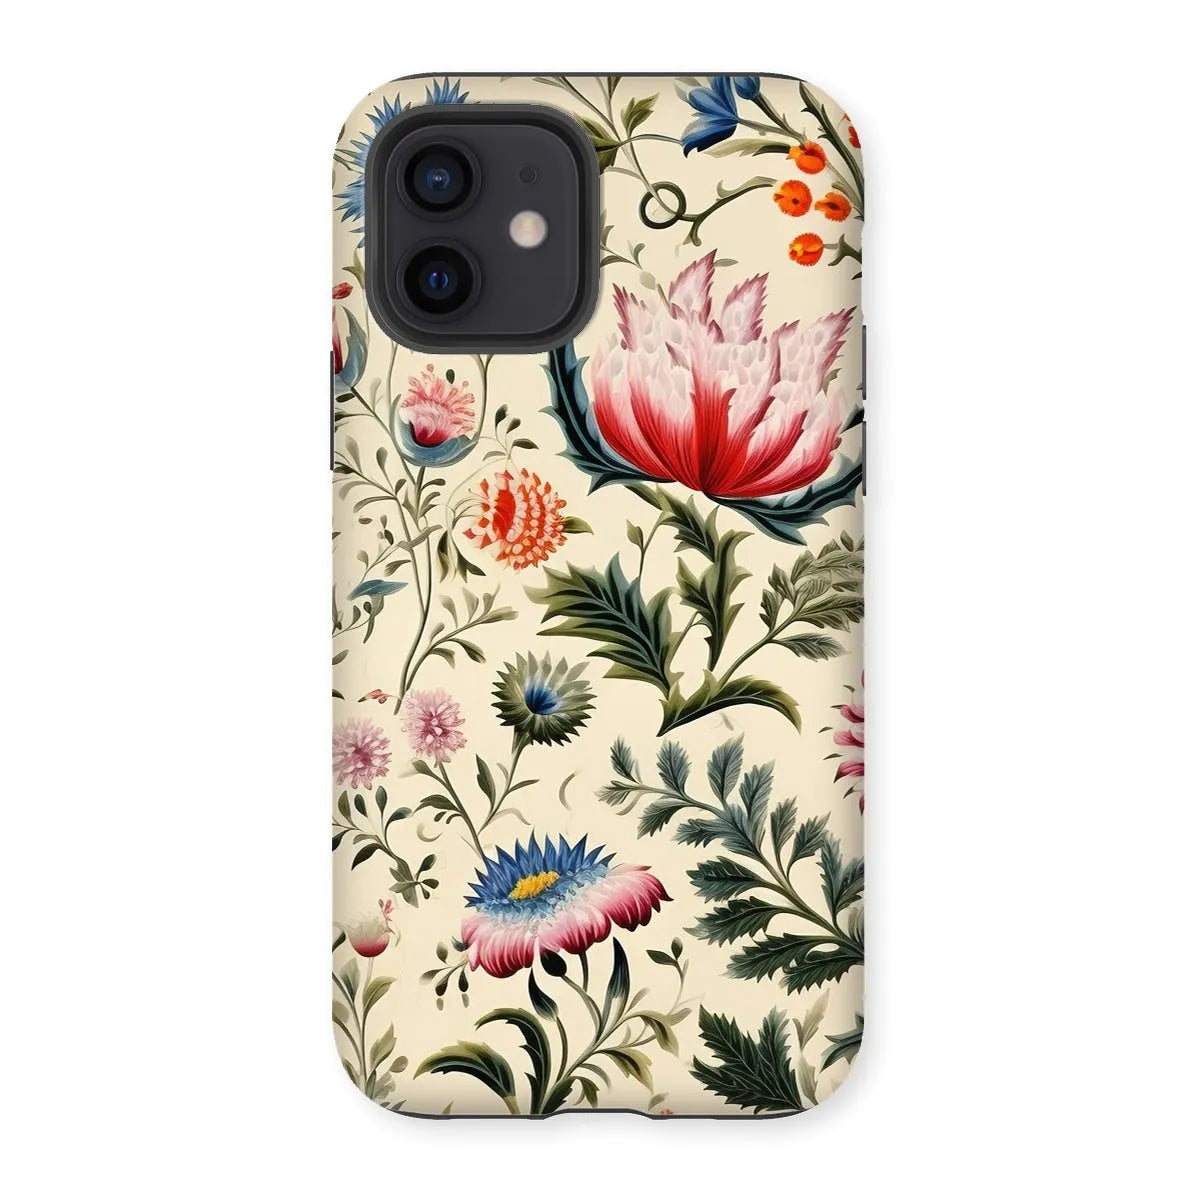 Wildflower Hoopla - Floral Garden Aesthetic Phone Case - Iphone 12 / Matte - Mobile Phone Cases - Aesthetic Art